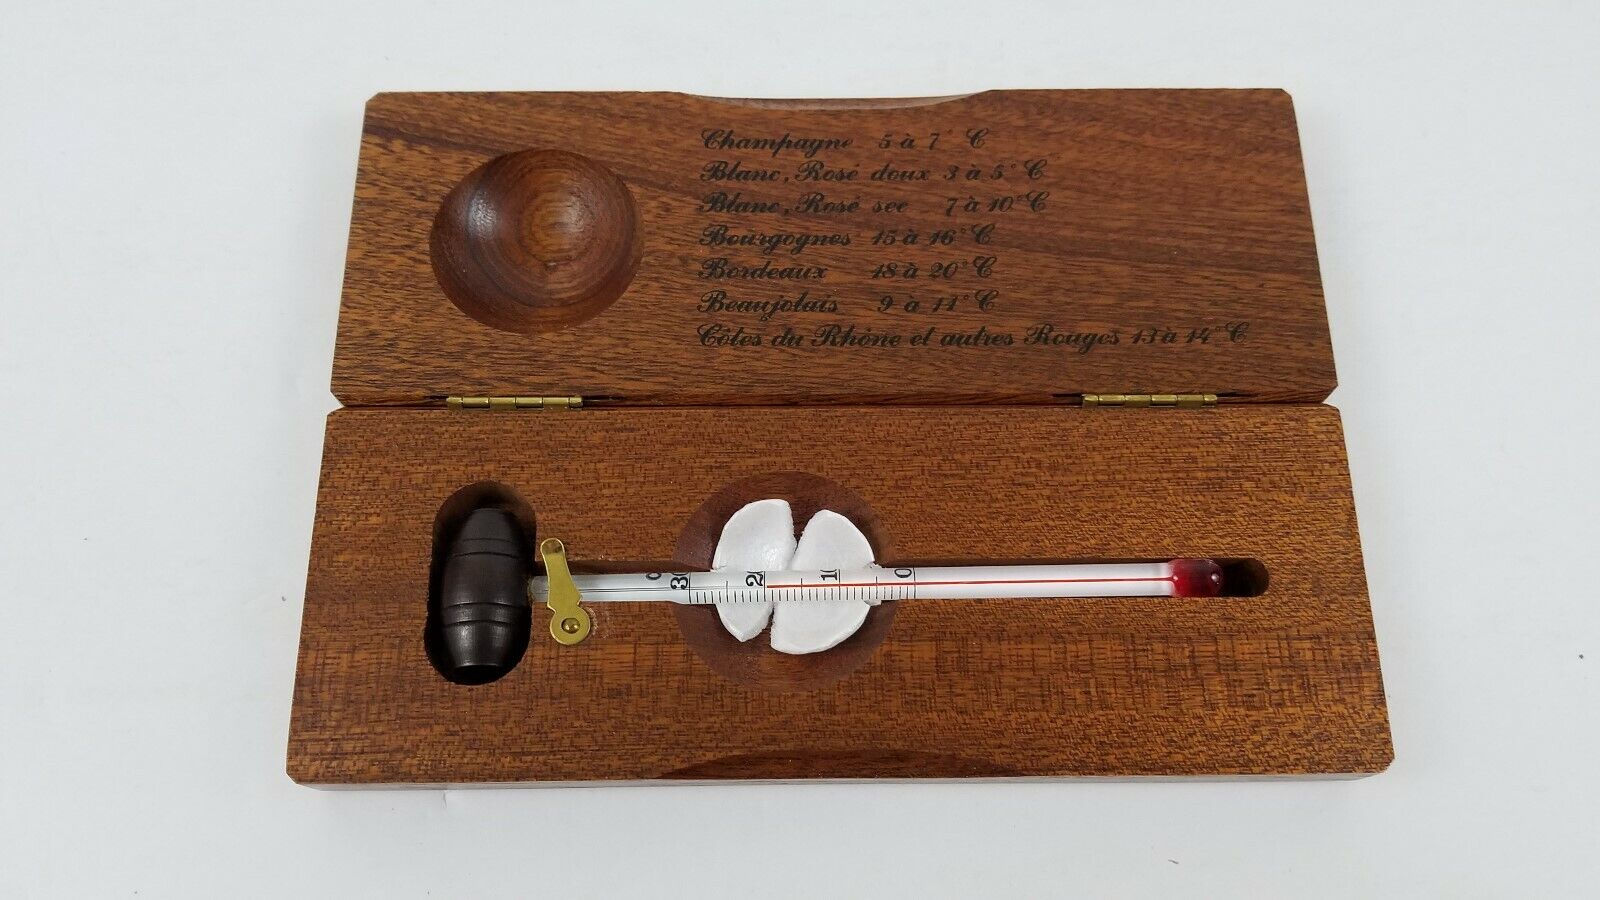 Vintage French Wine Thermometer Wood Box Pour Servir A la Juste Temperature